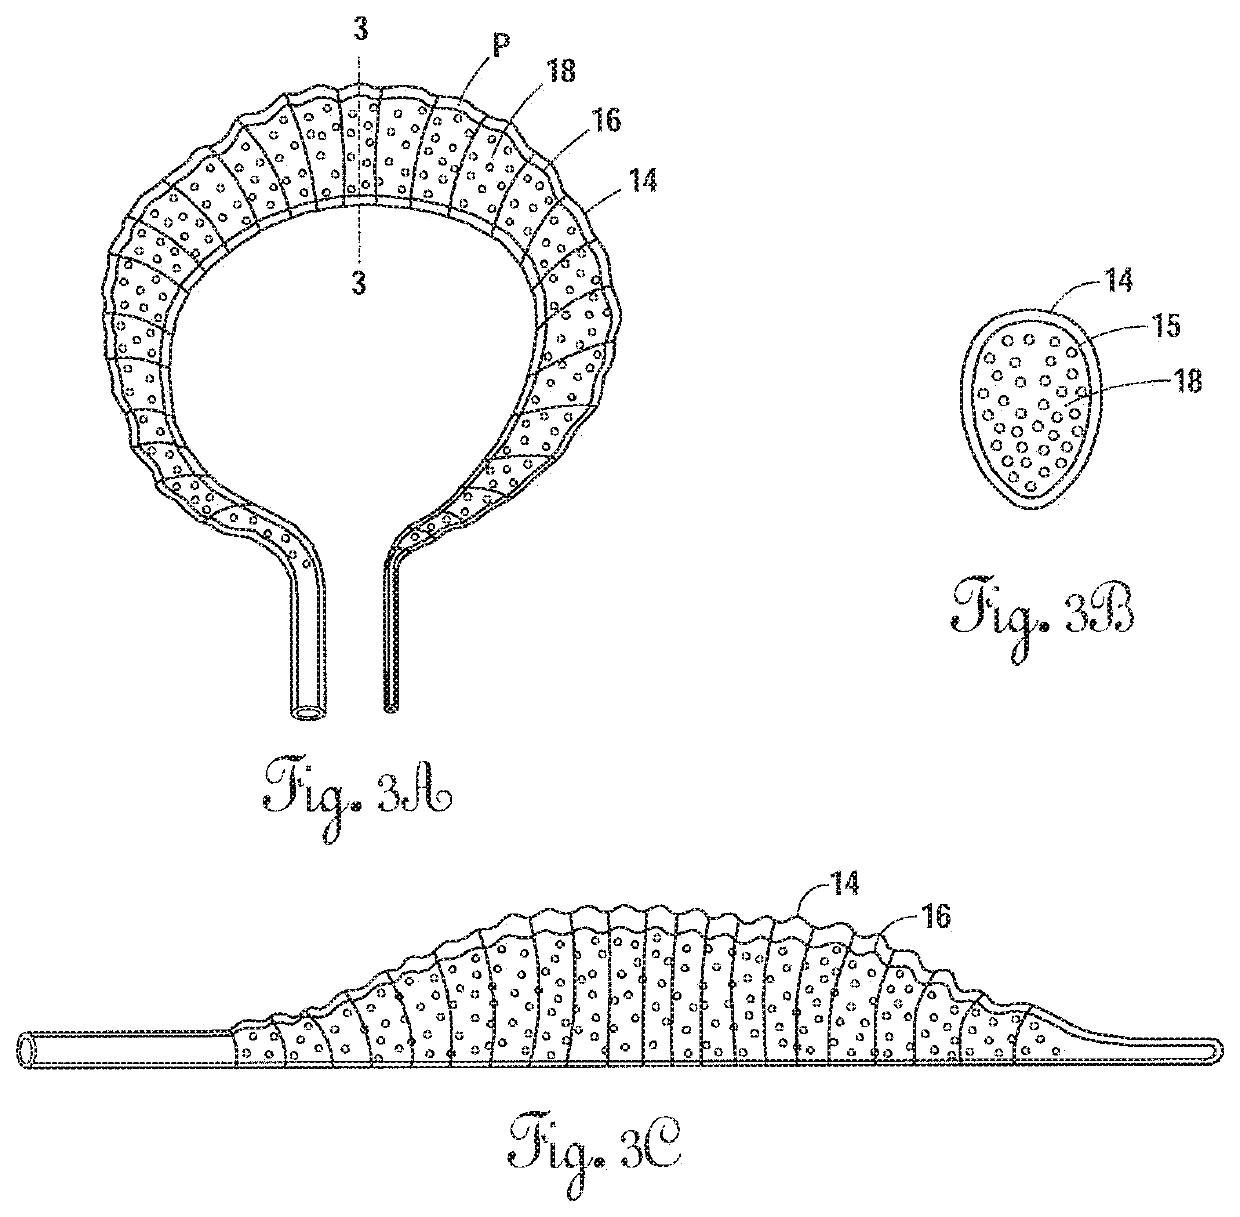 Radially expandable annulus reinforcement prosthesis